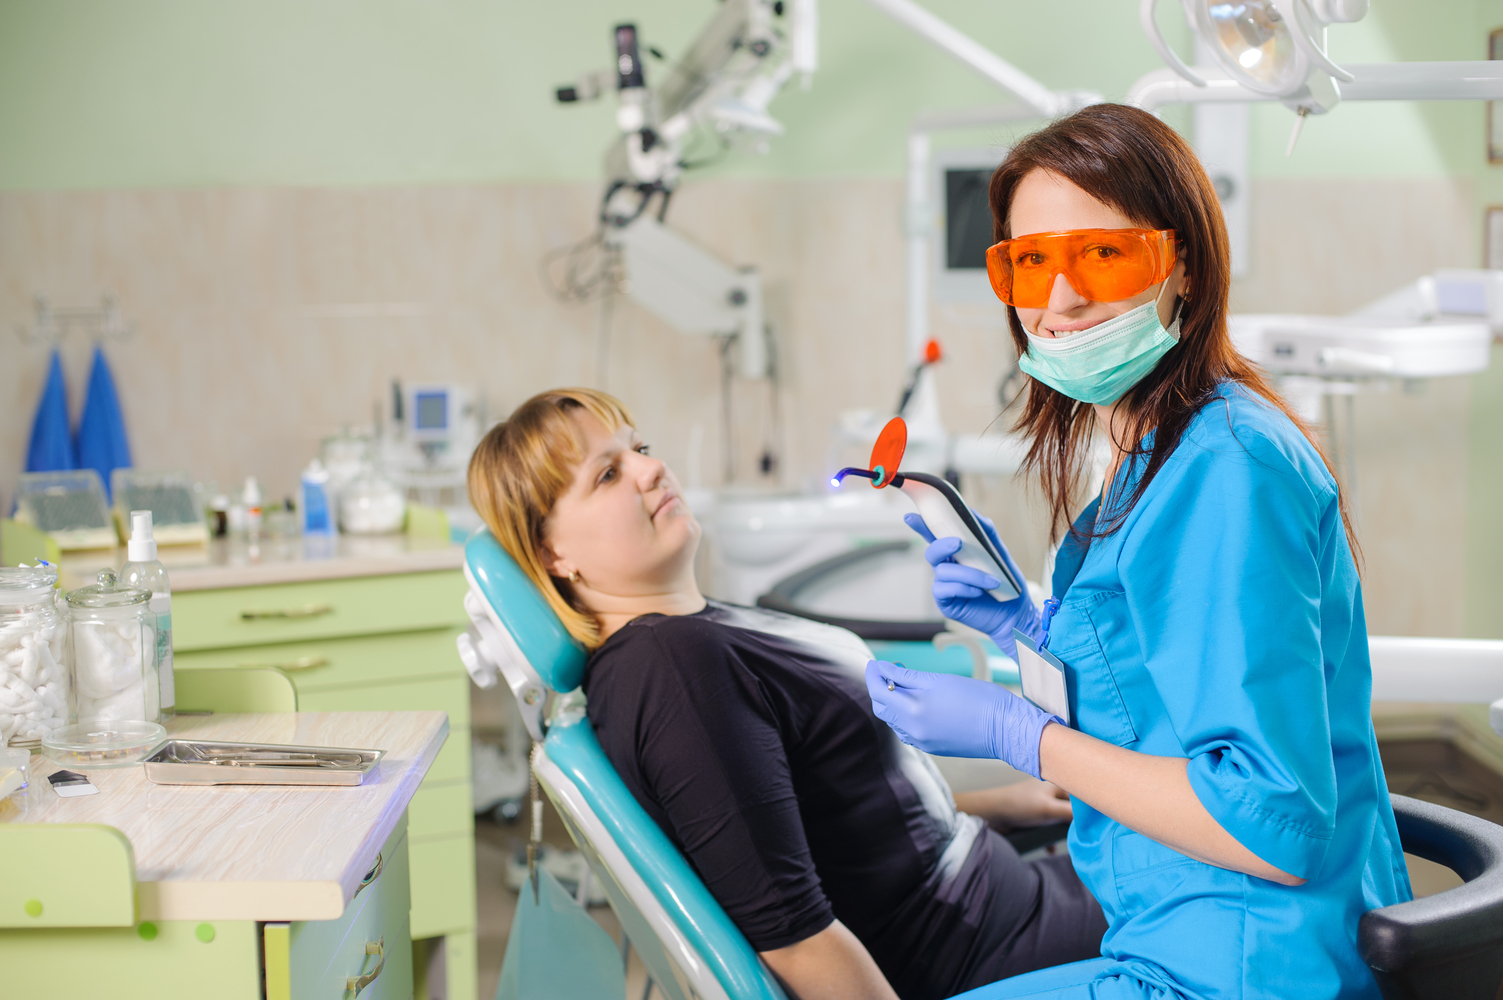 Female dentist doctor is holding dentist photopolymer lamp getting ready to treat patient in clinic. Woman is wearing gloves and glasses. Medical equipment. Dental care and treatment